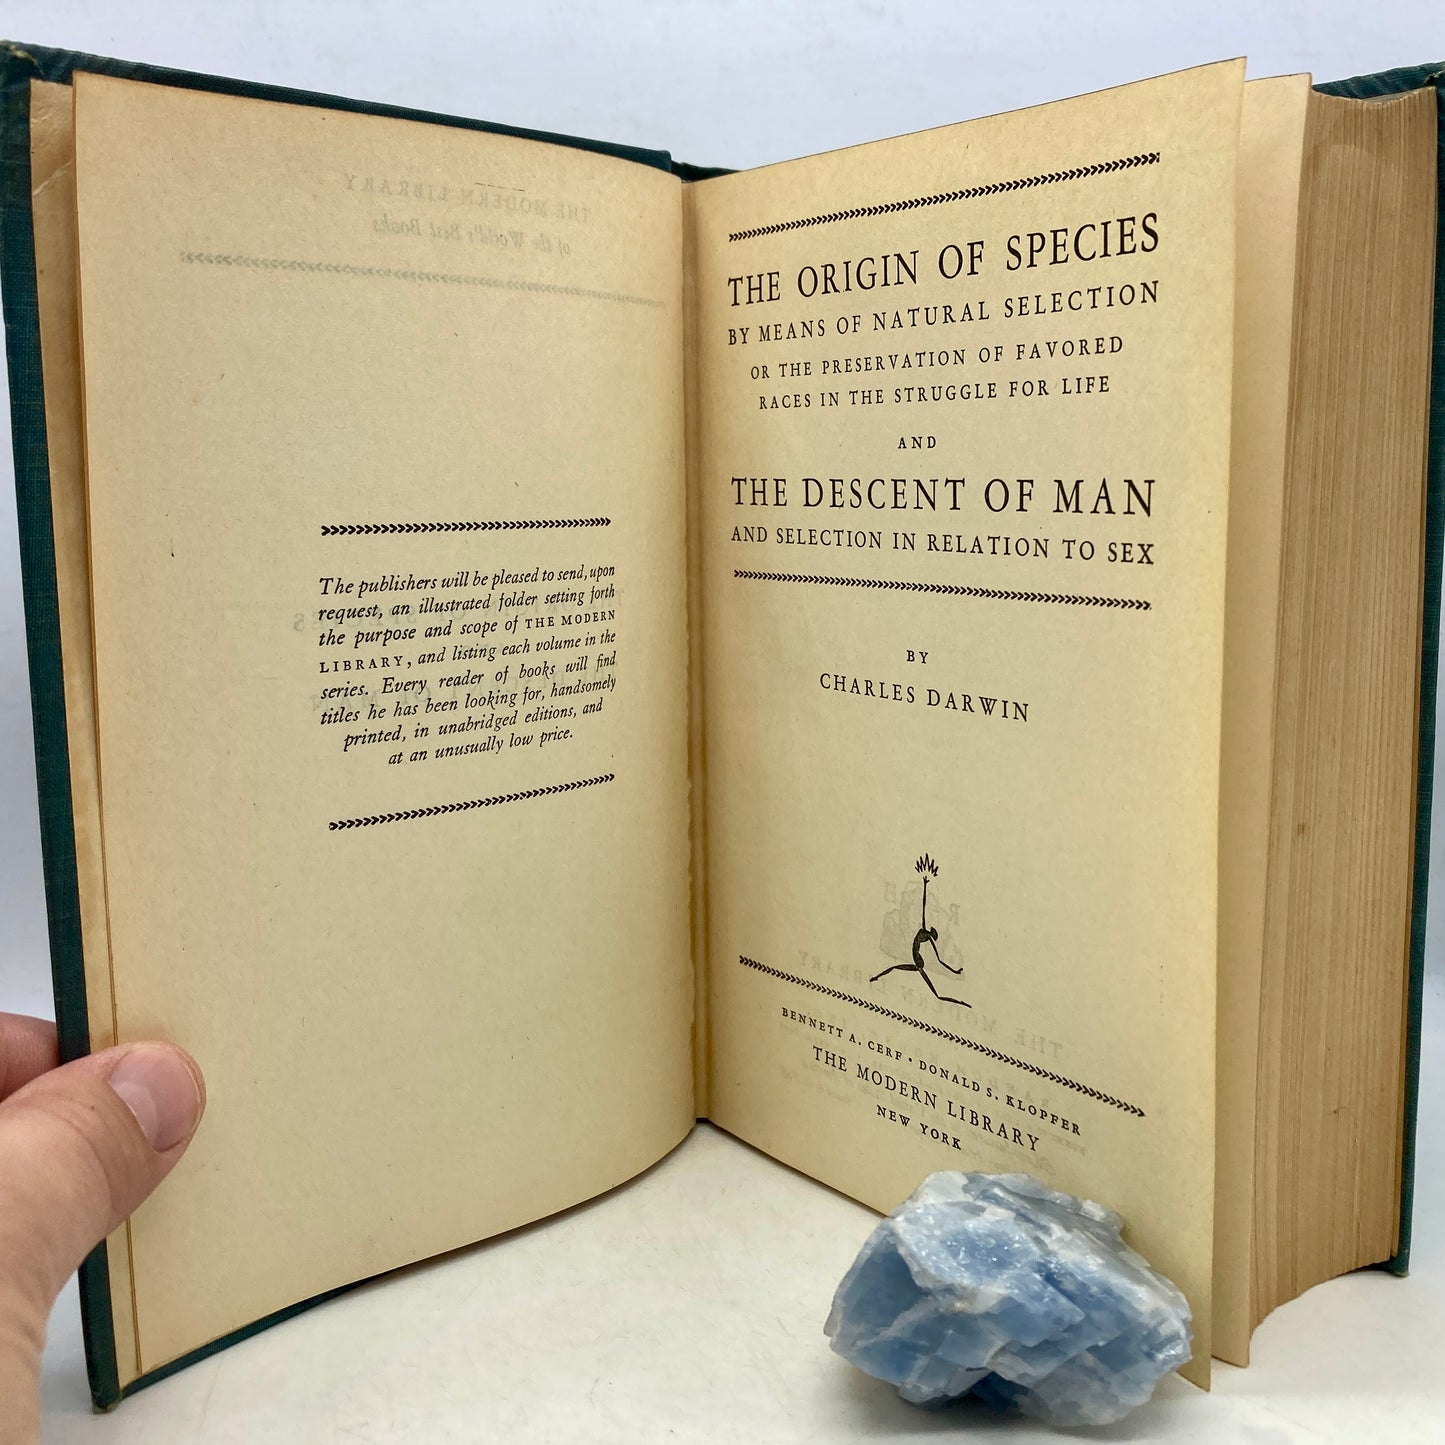 DARWIN, Charles "The Origin of Species and The Descent of Man" [Modern Library, c1950]